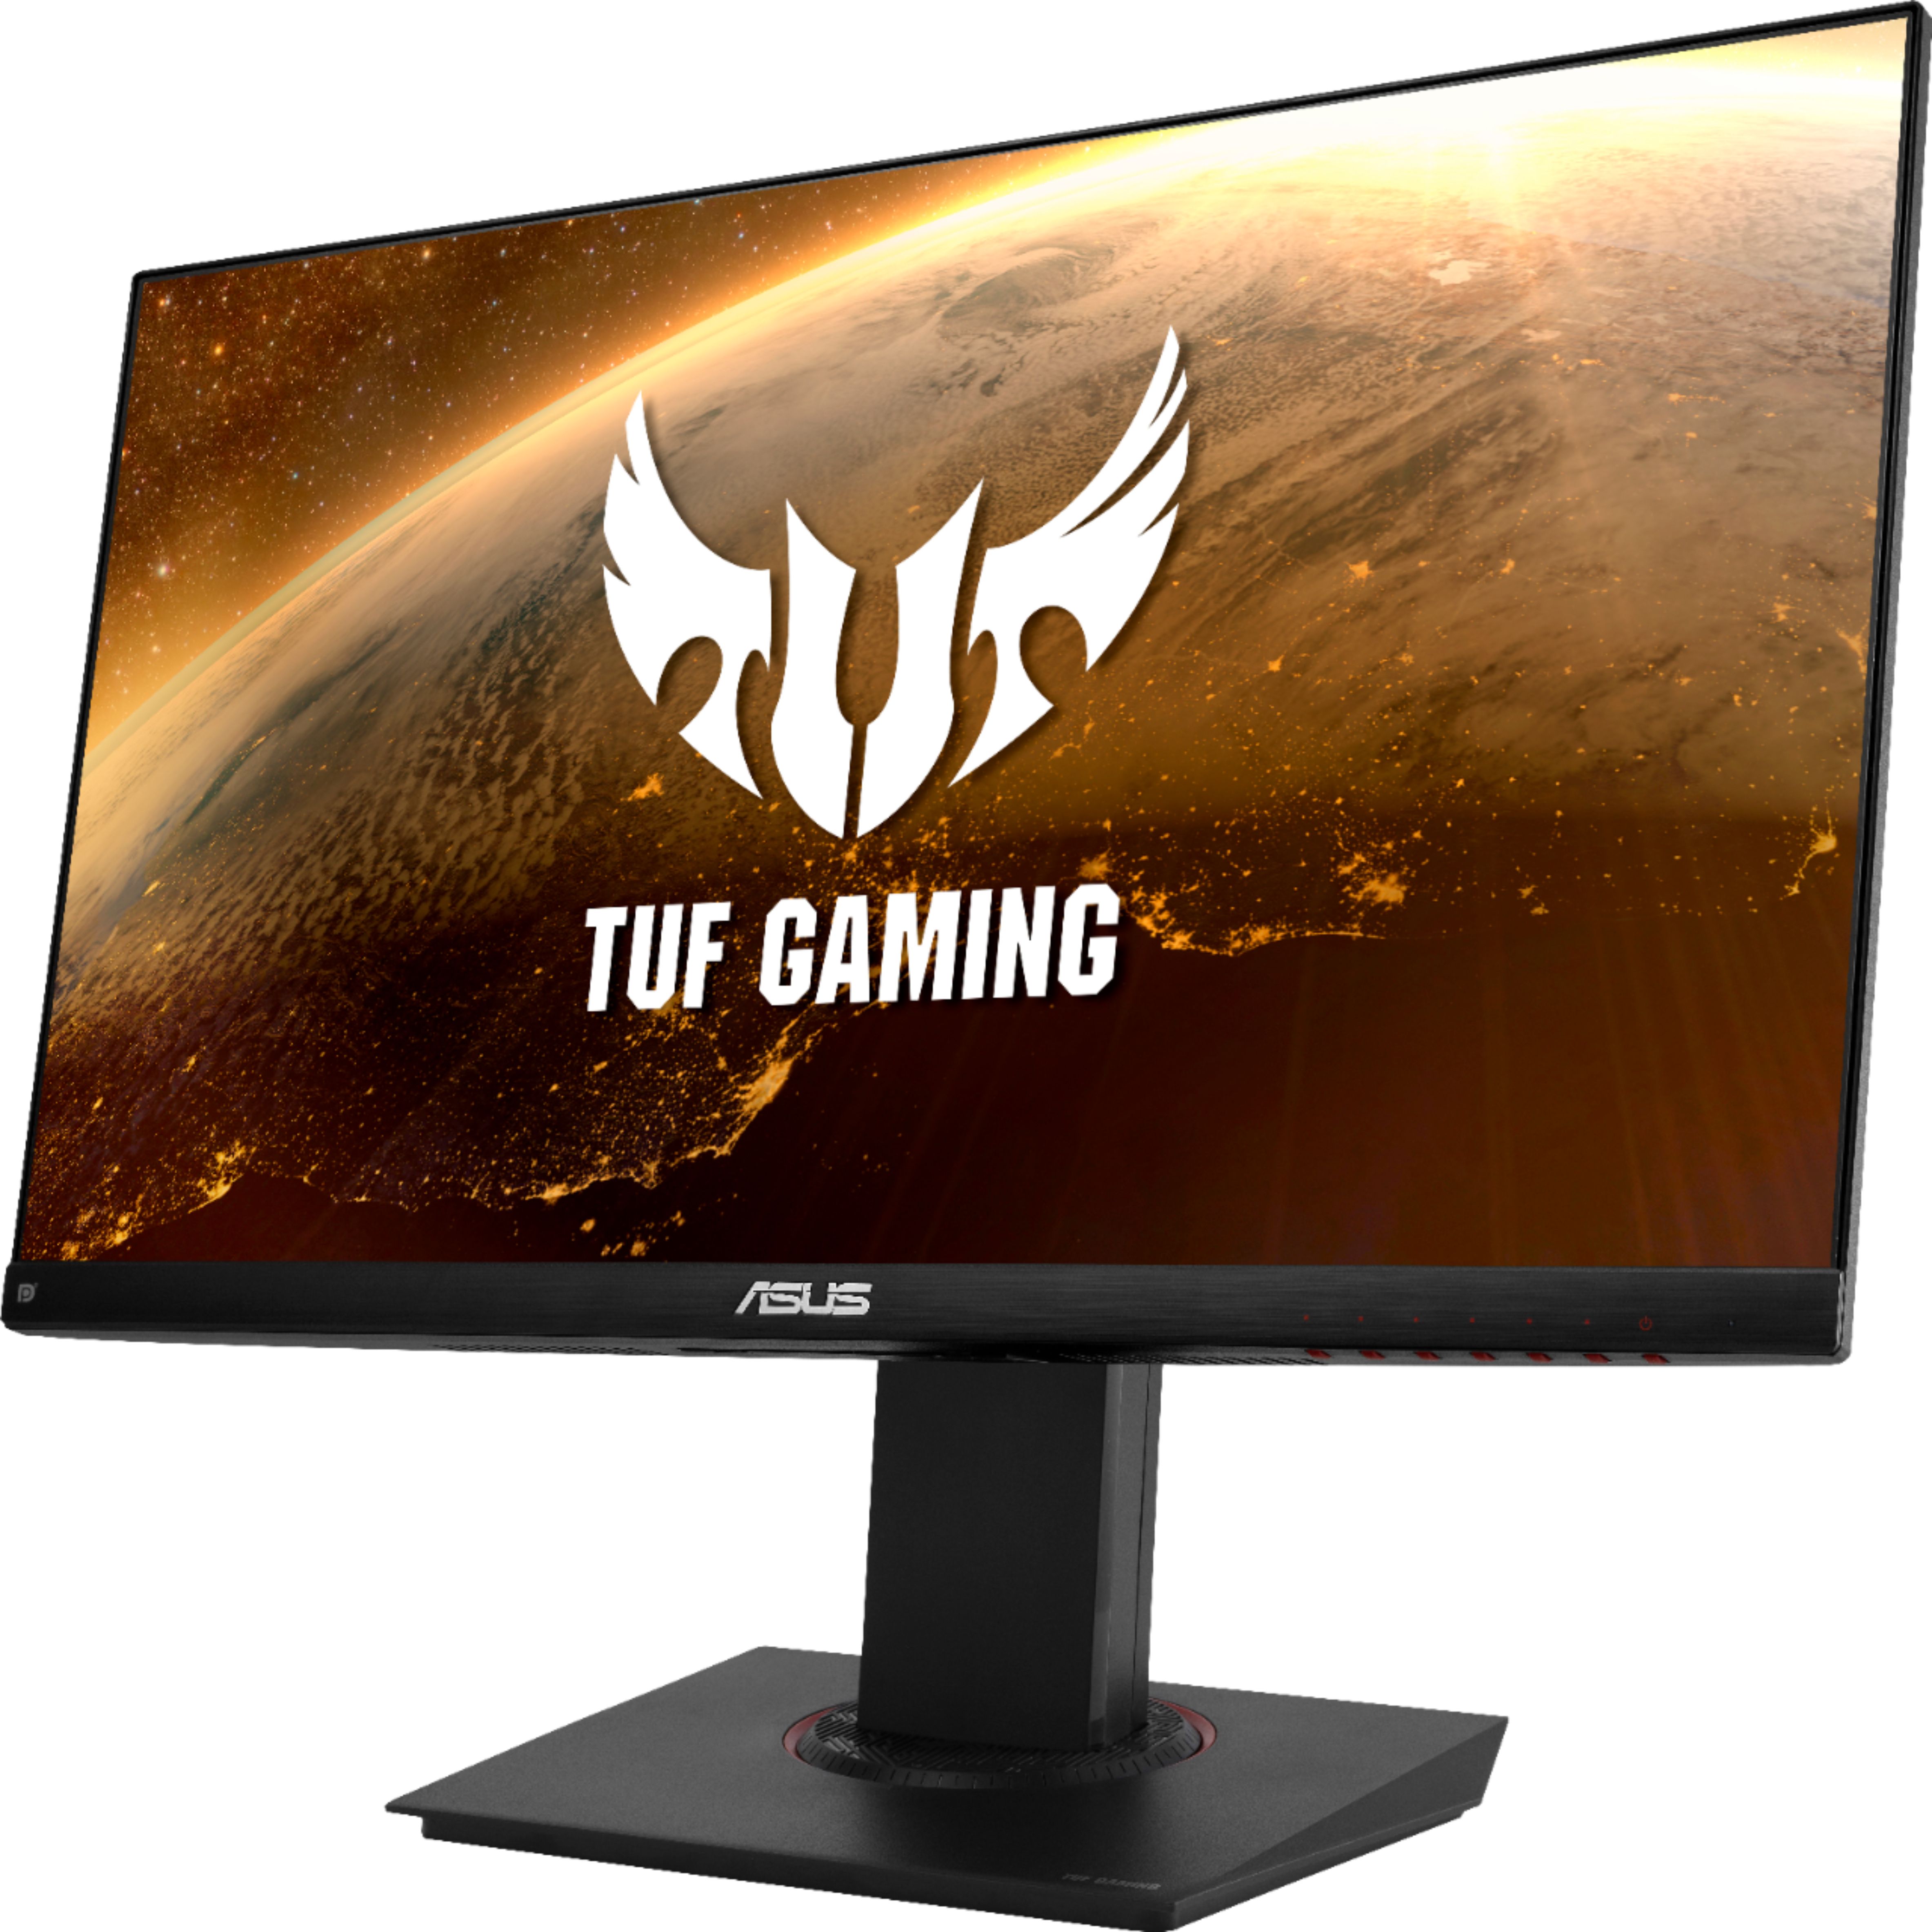 Left View: ASUS - Geek Squad Certified Refurbished TUF Gaming 23.8" IPS LED FHD FreeSync Monitor - Black